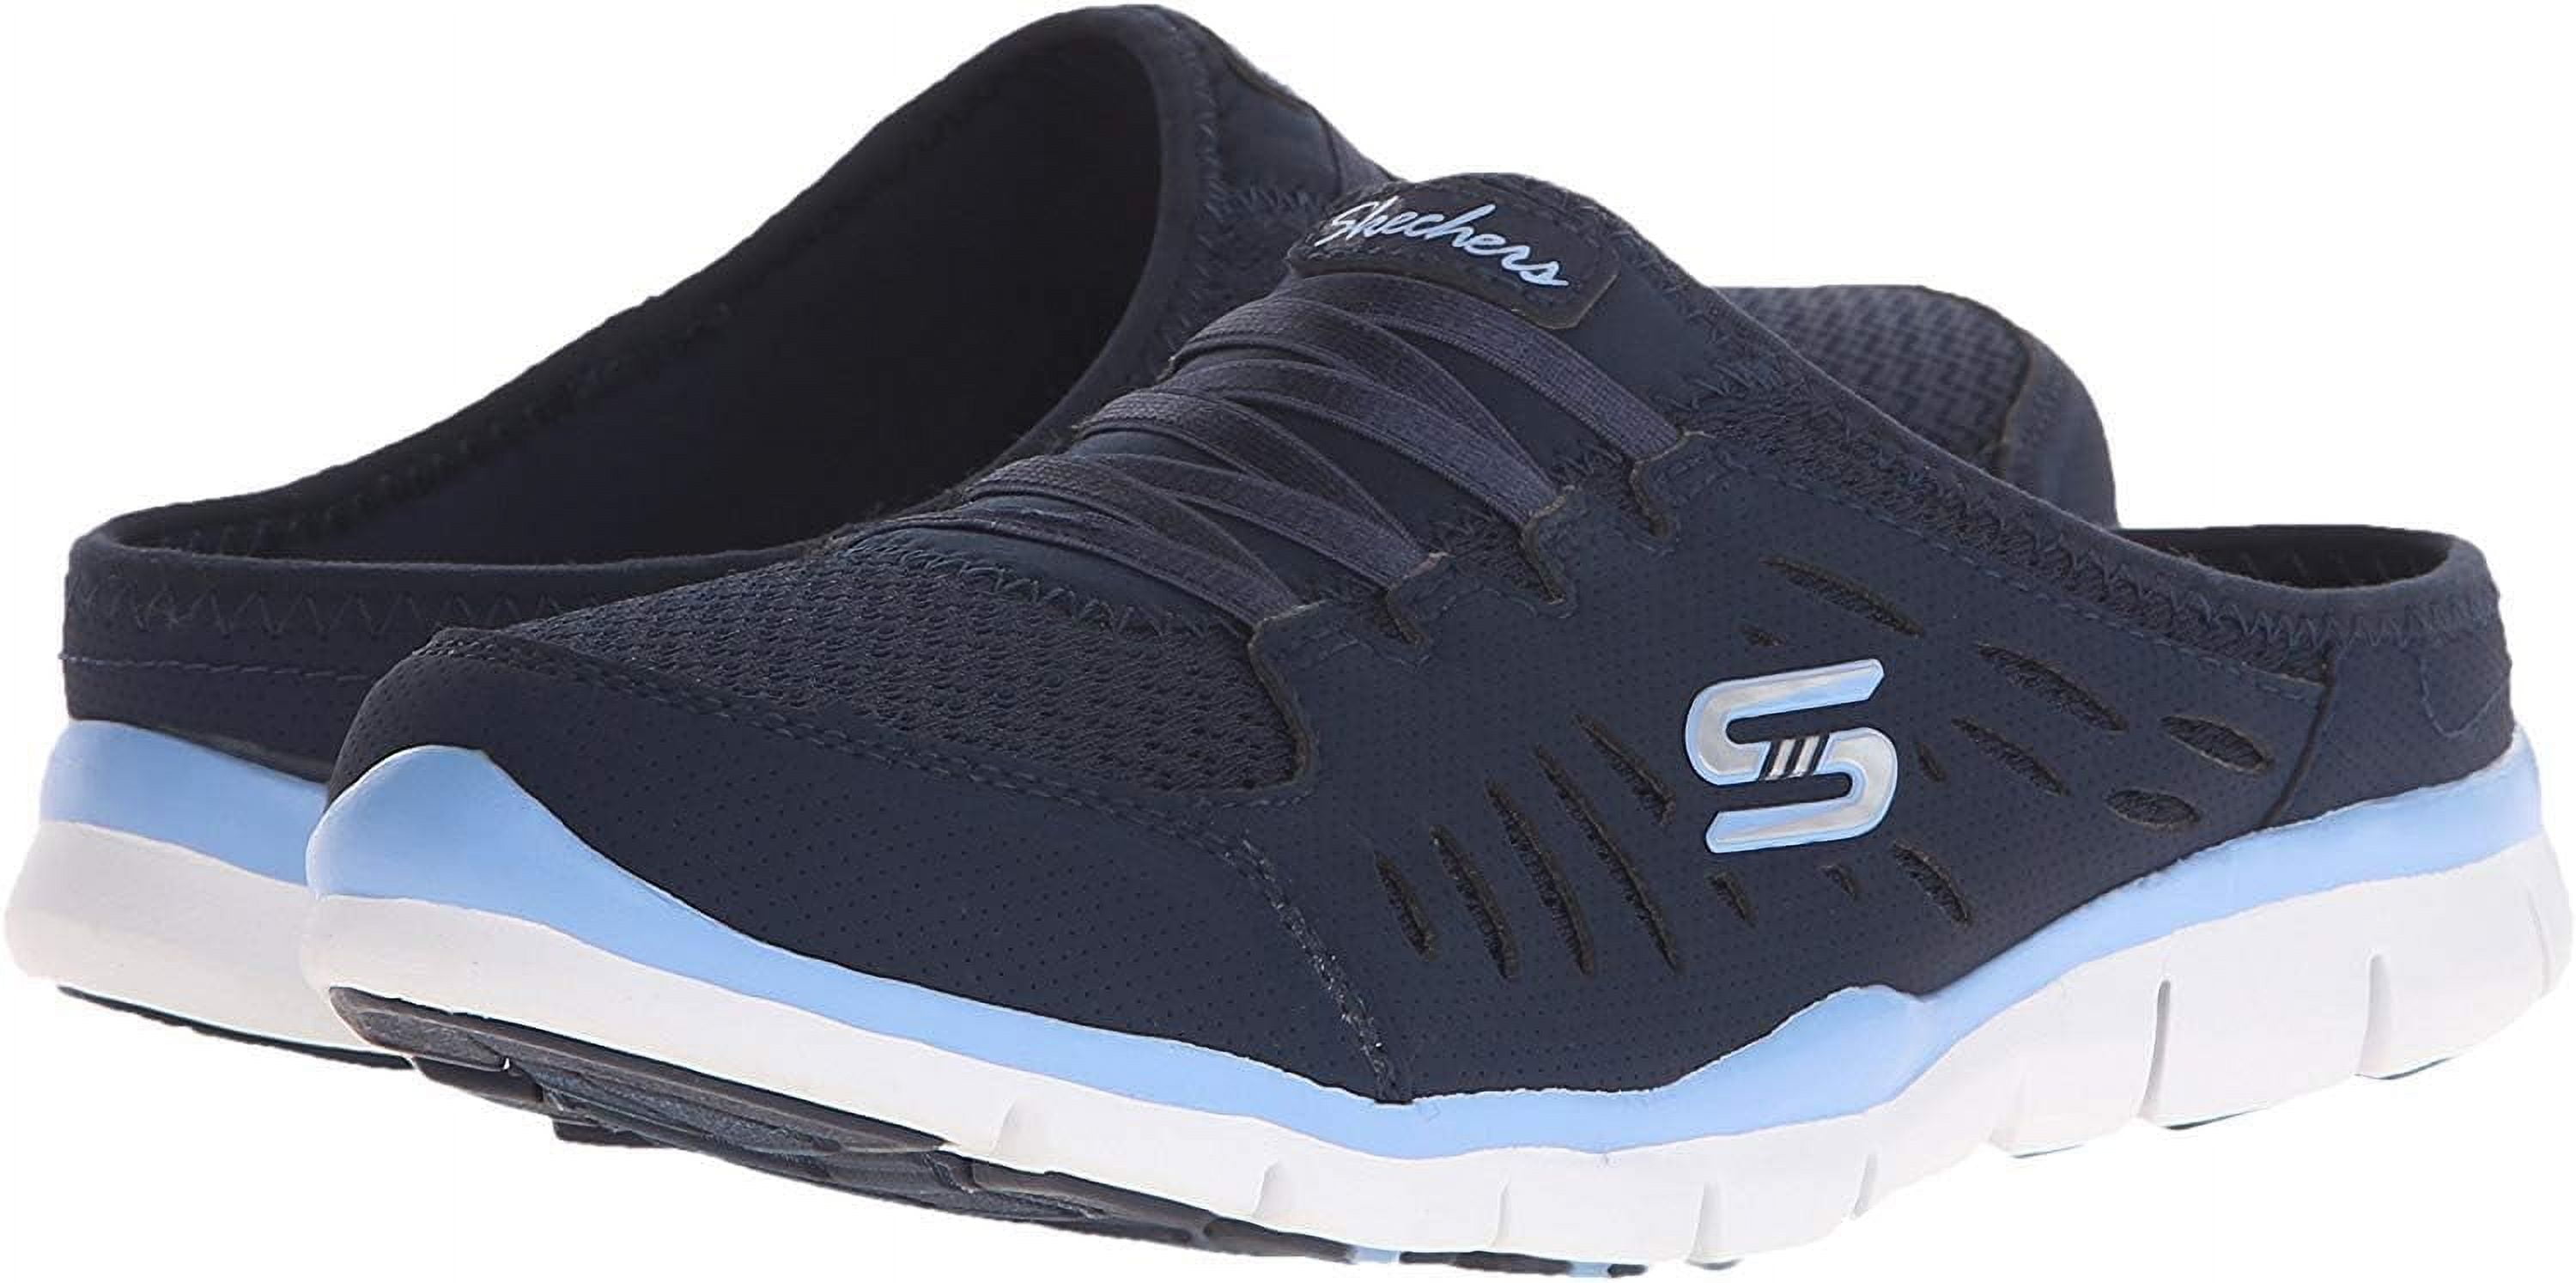 Sport minimalist shoes Nummulit Ignis in Galaxy Blue color